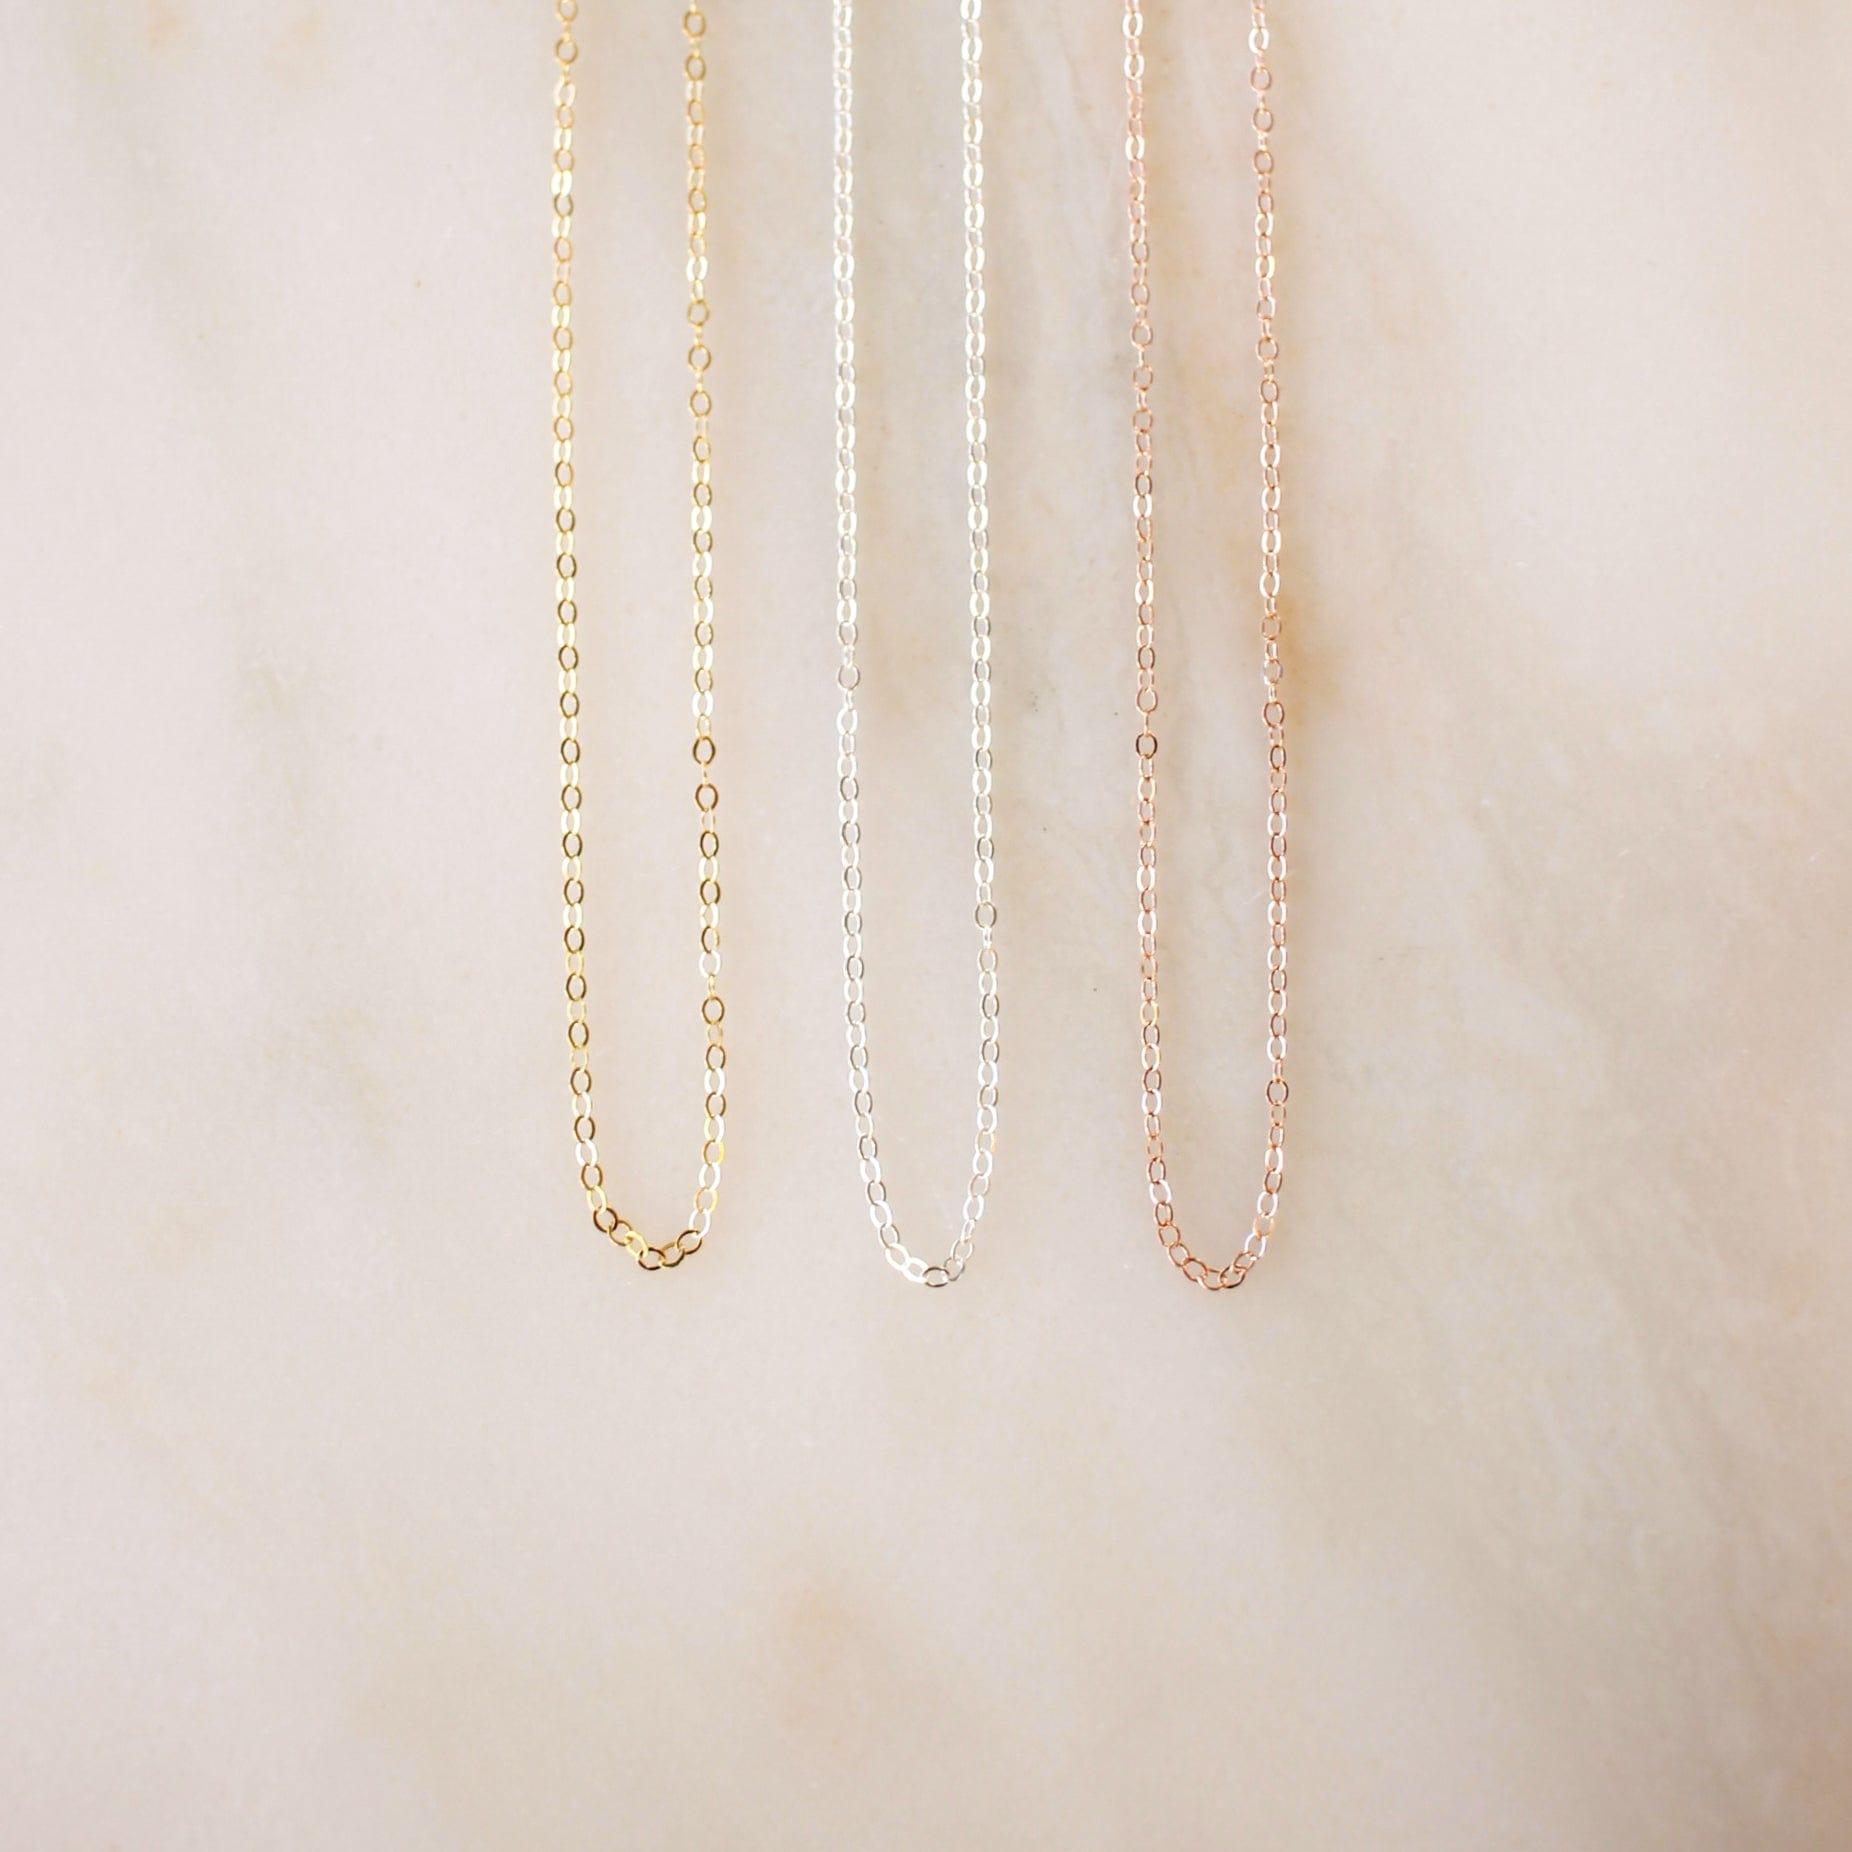 Whisper Chain Necklace - Nolia Jewelry - Meaningful + Sustainably Handcrafted Jewelry